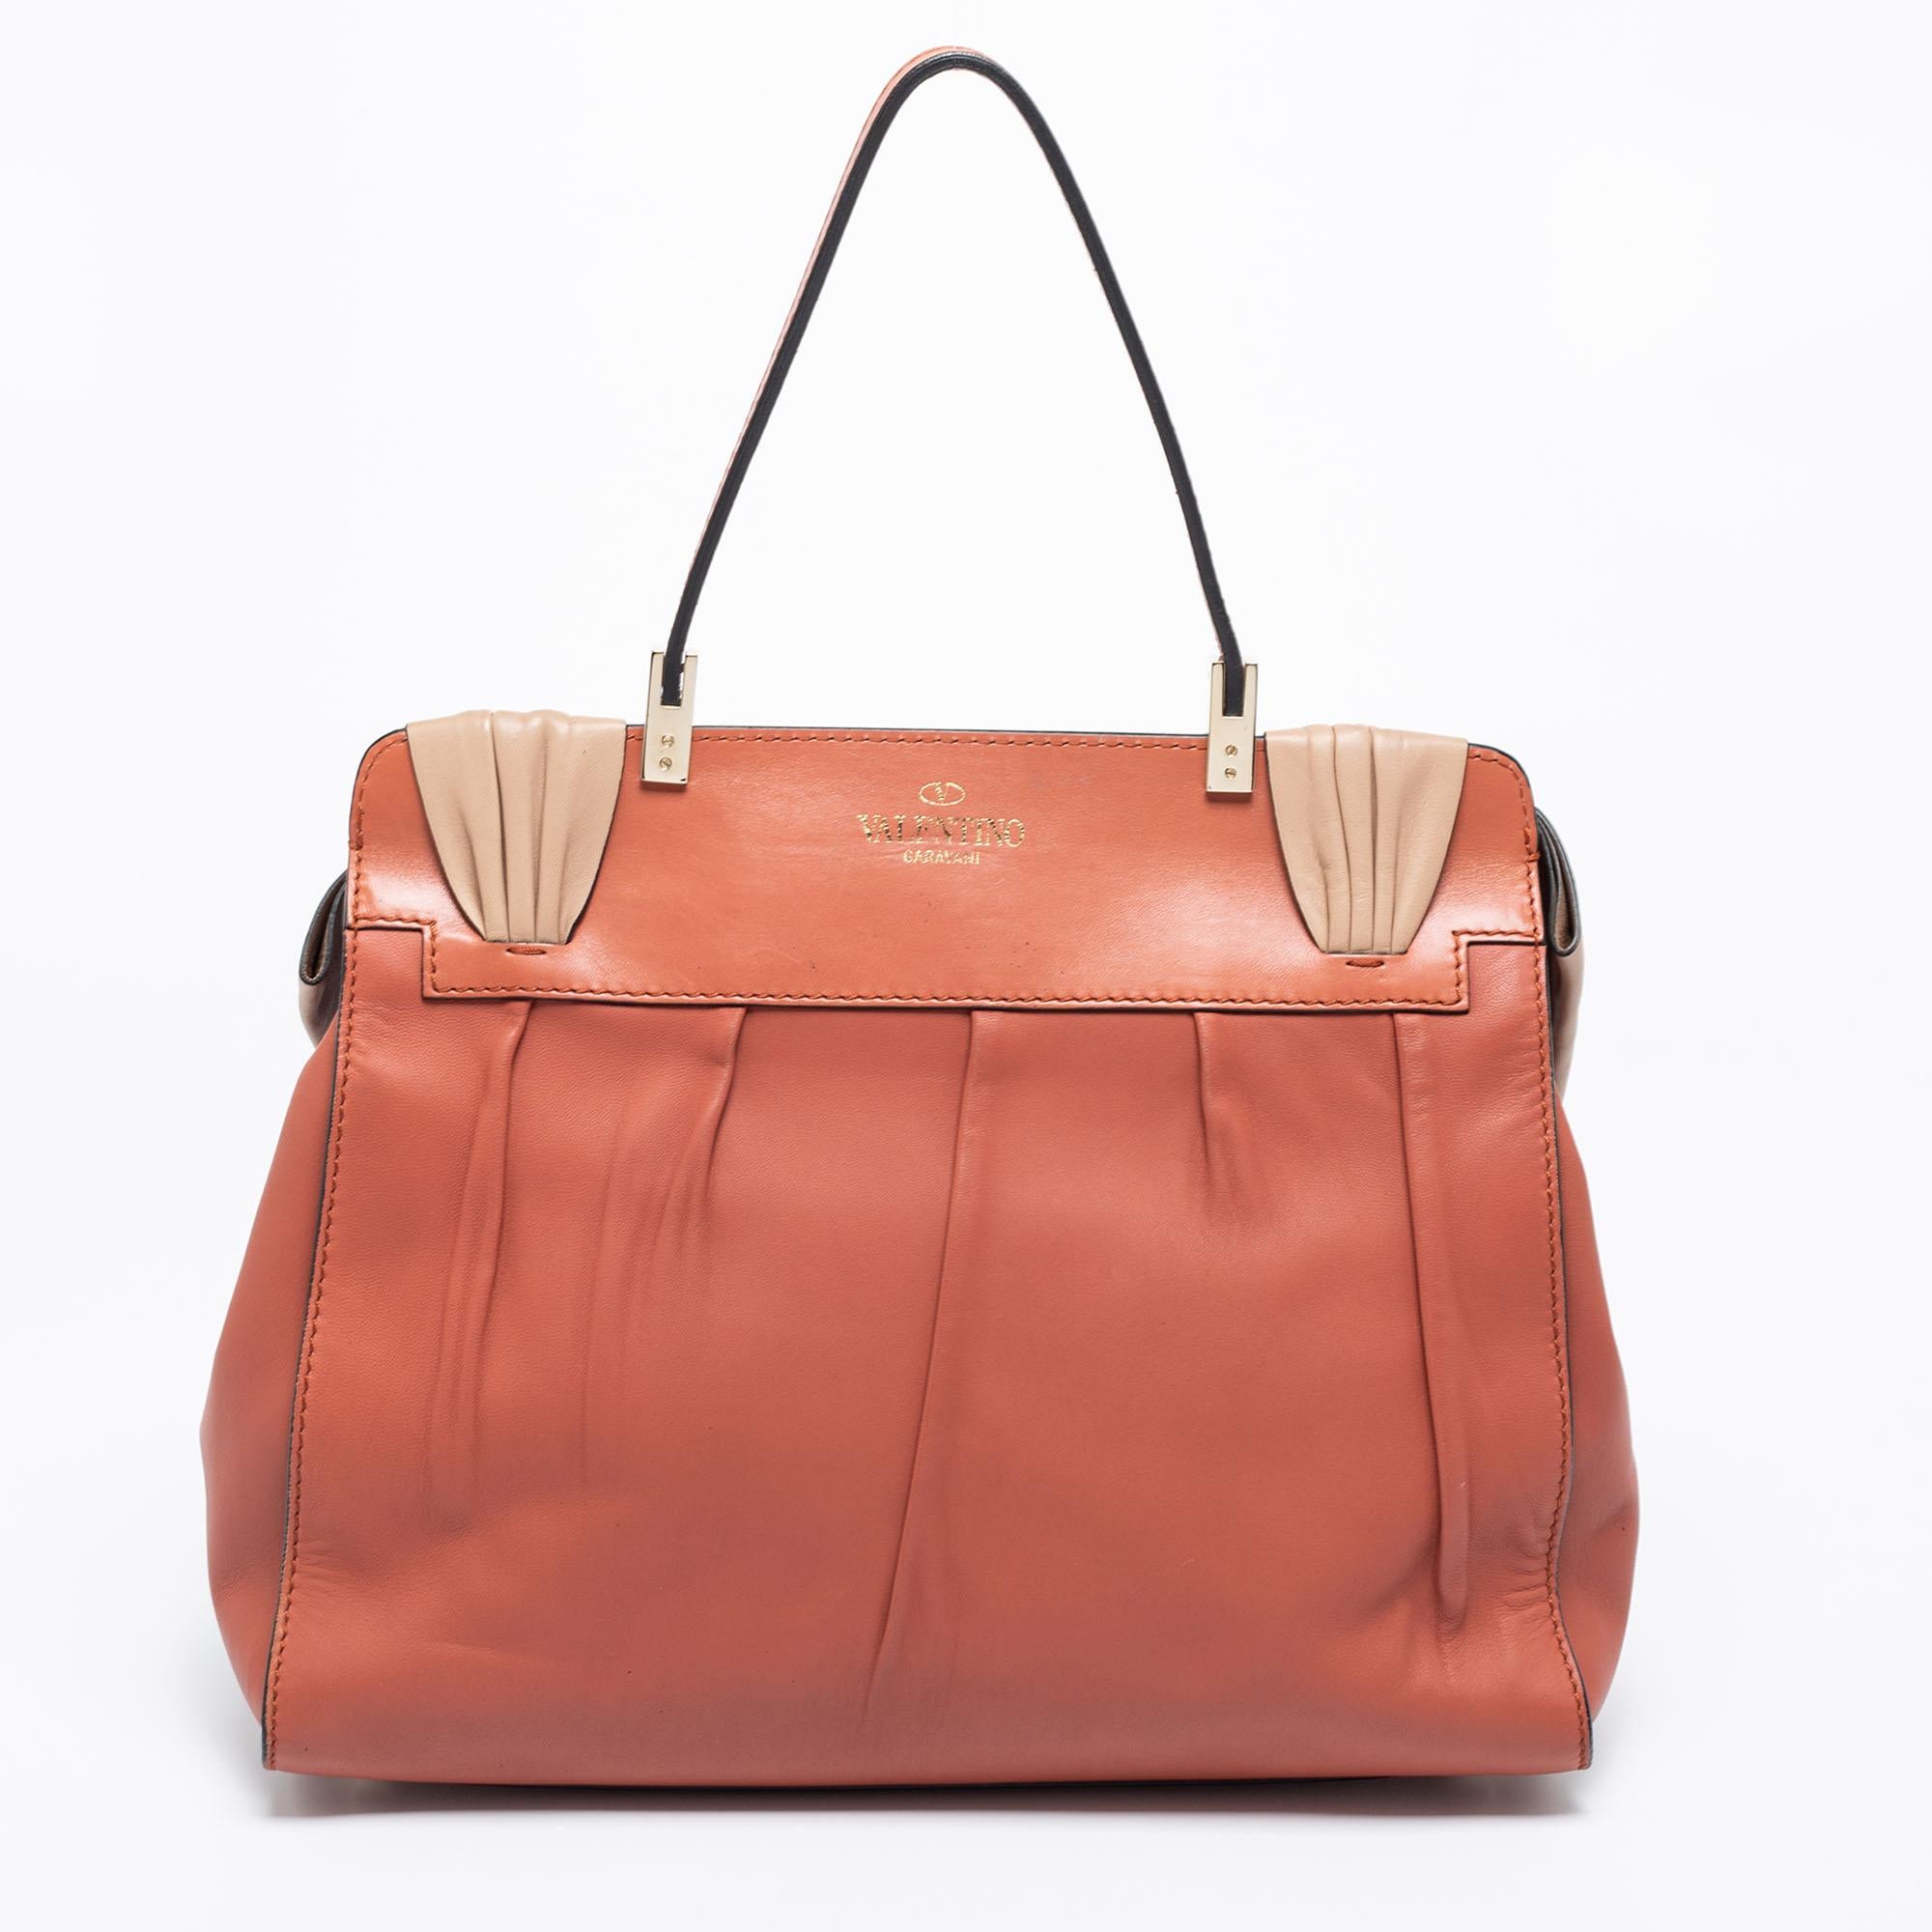 This feminine Aphrodite bag by Valentino will surely meet all your expectations. Crafted beautifully, it comes in lovely shades of brown & beige and is accented with an exaggerated bow at the front. Crafted from leather into an elegant design, it is